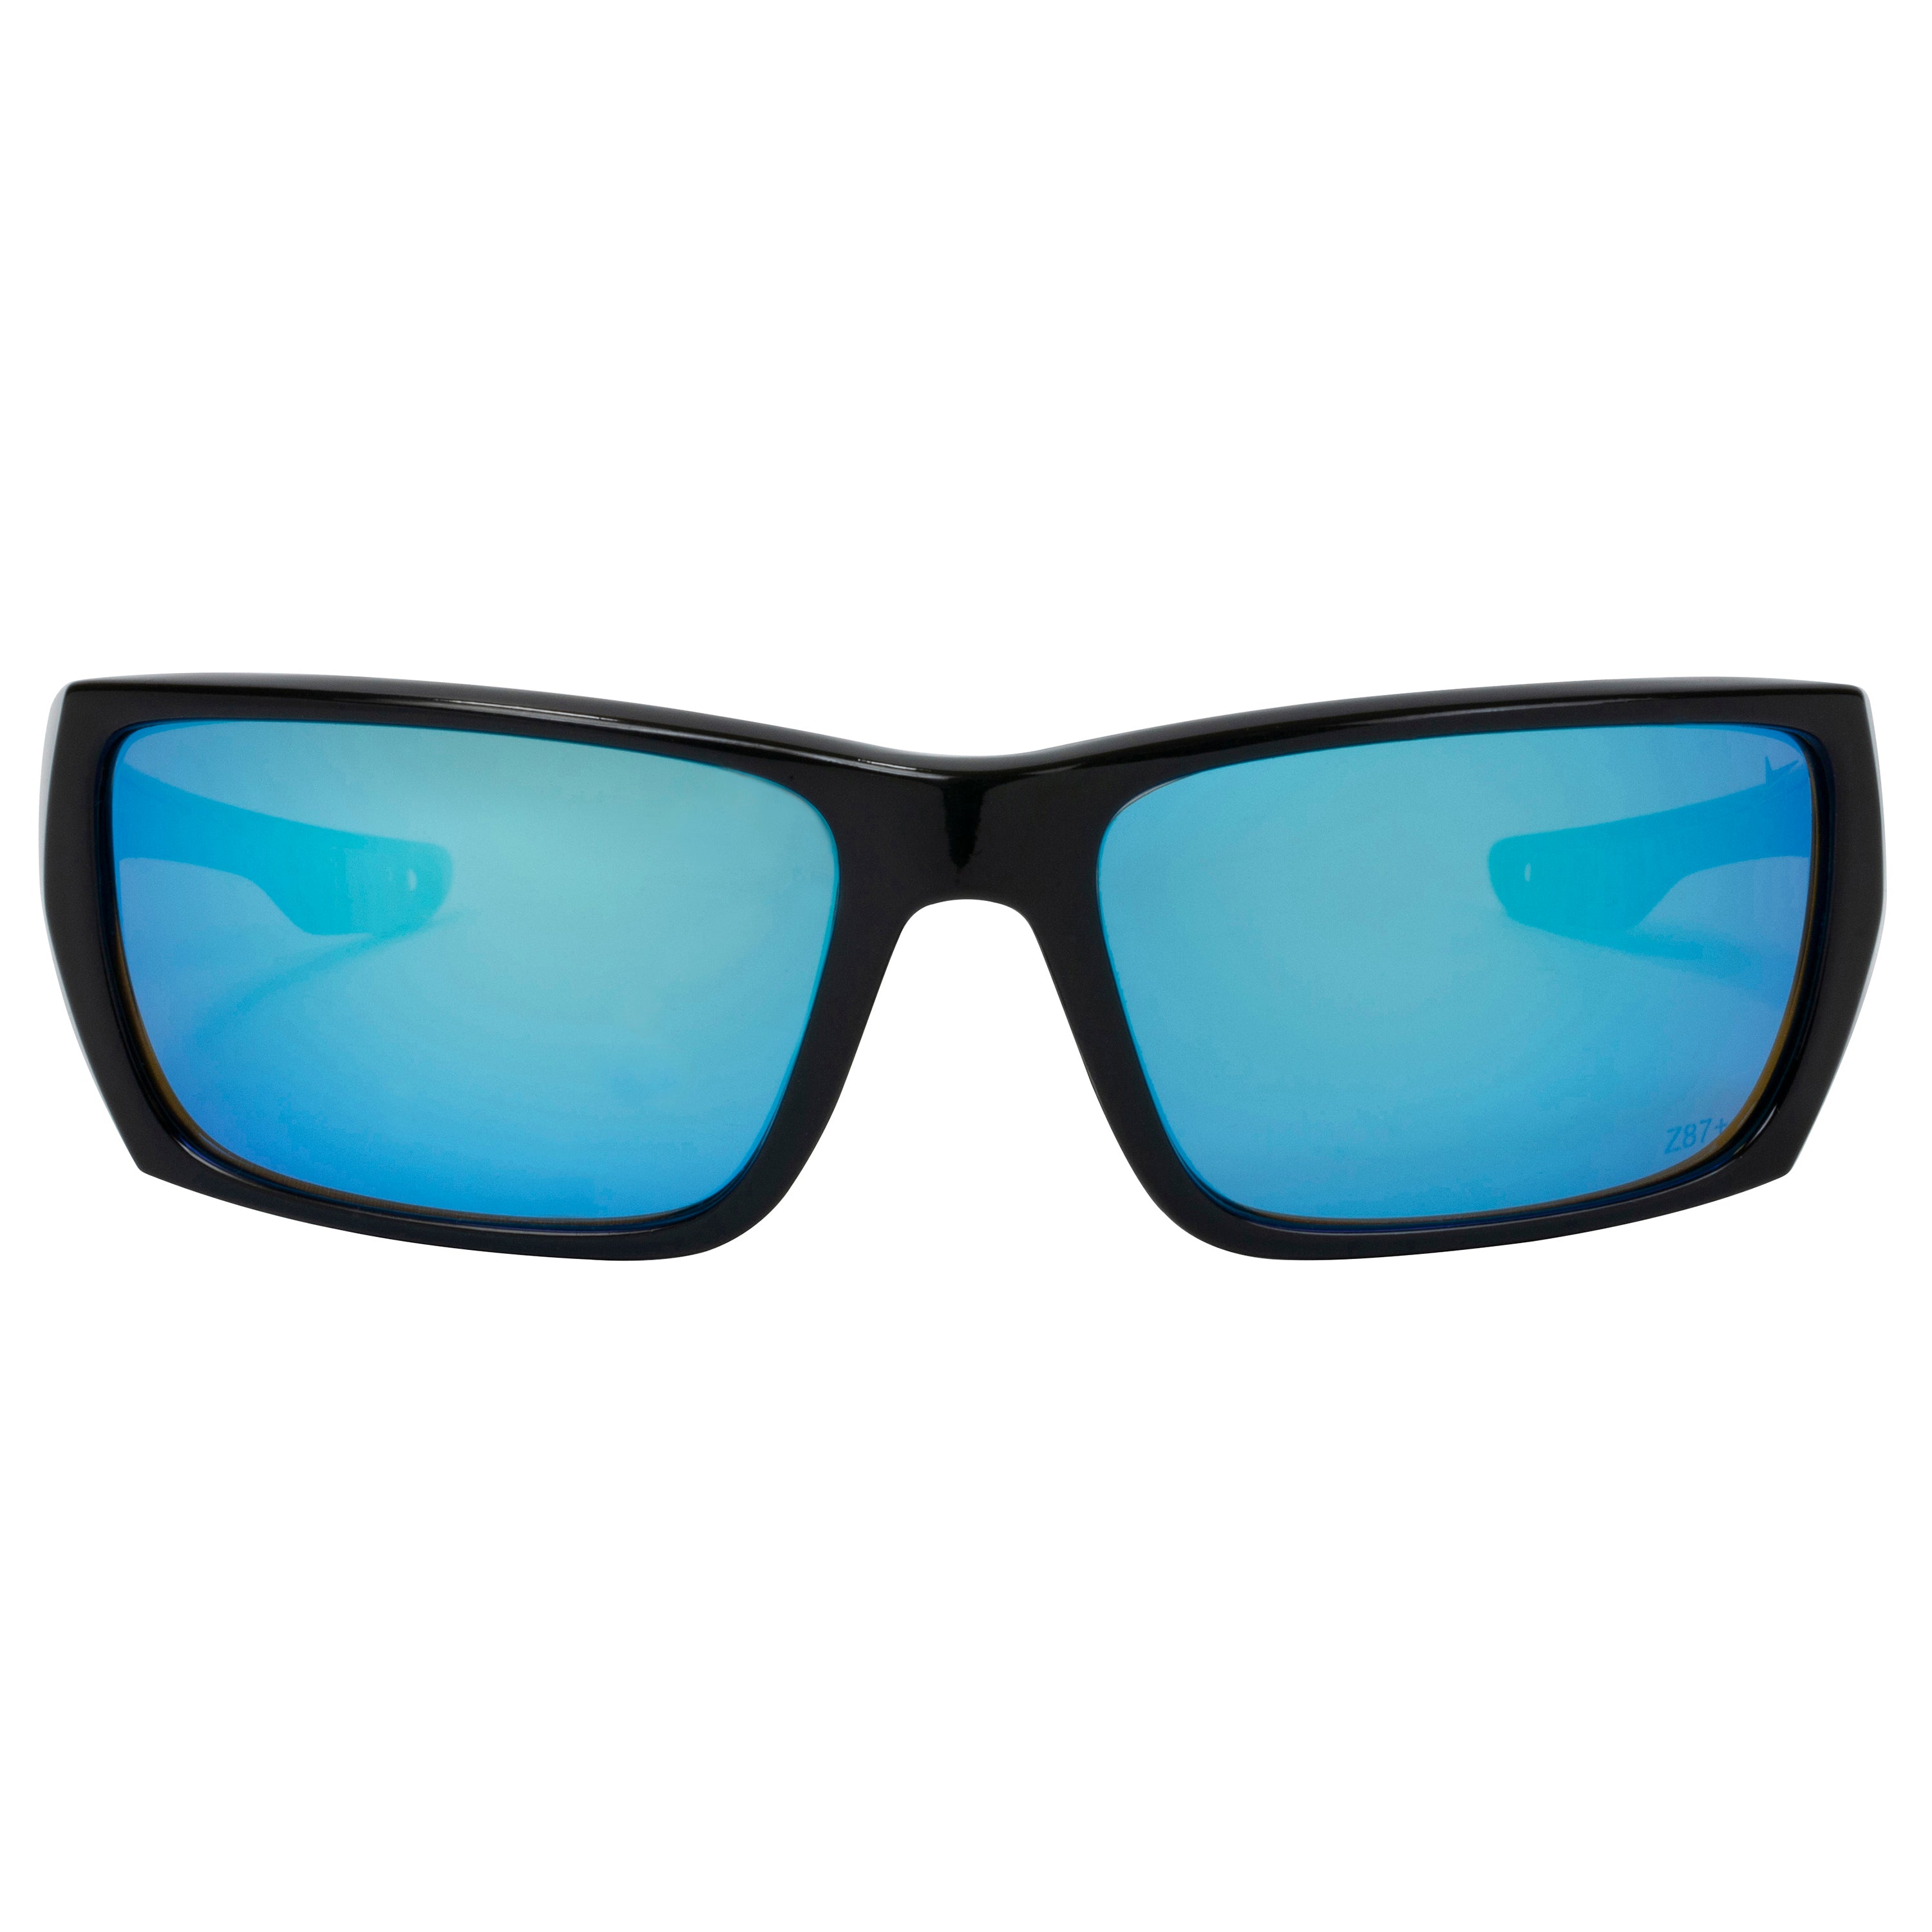 Polycarbonate Polarized Blue Mirror Lens Sport Safety Sunglasses with Grey Rubber Accents.